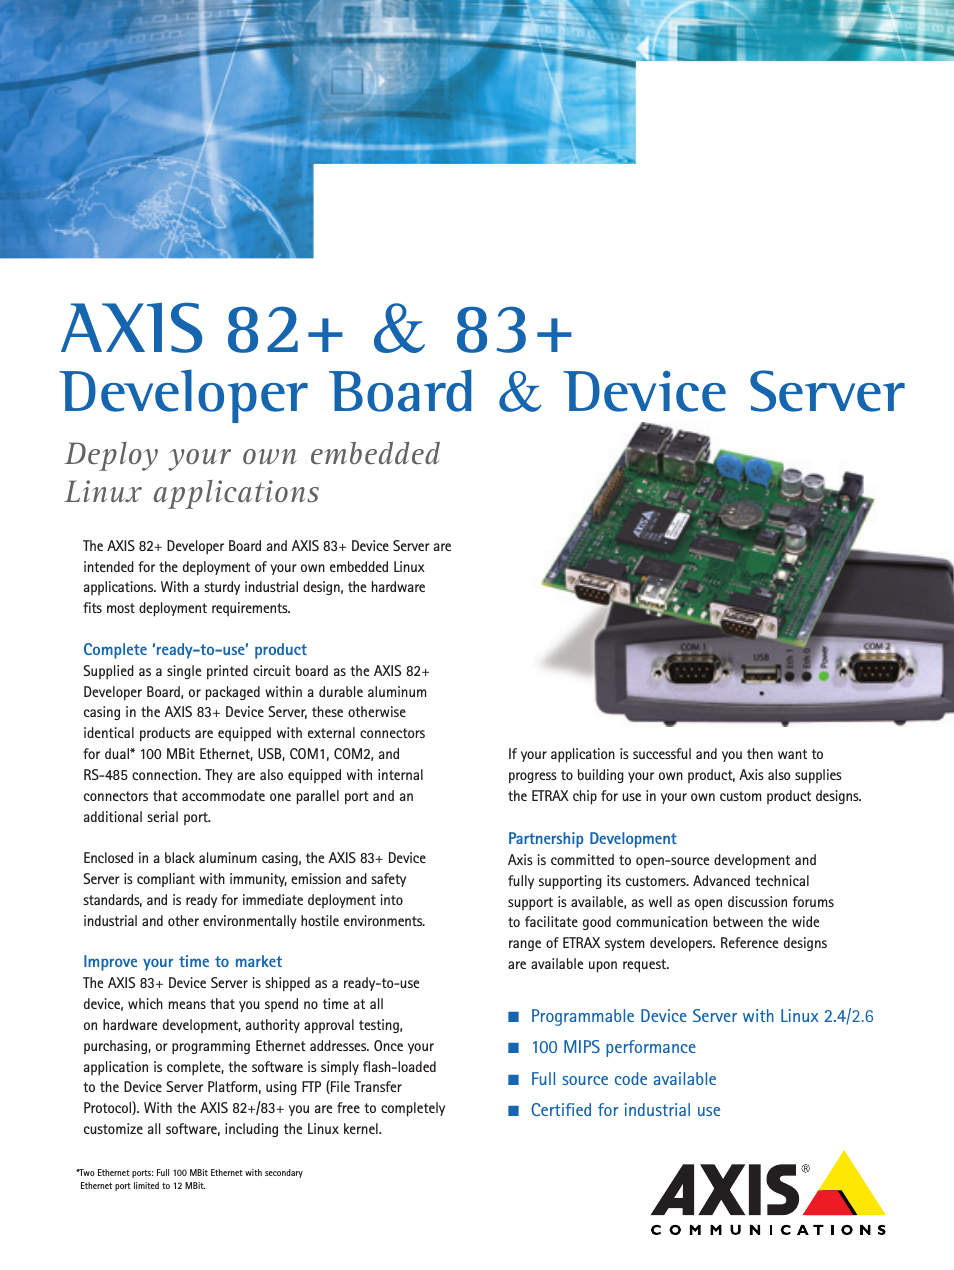 Developer Board and Device Server AXIS 82+